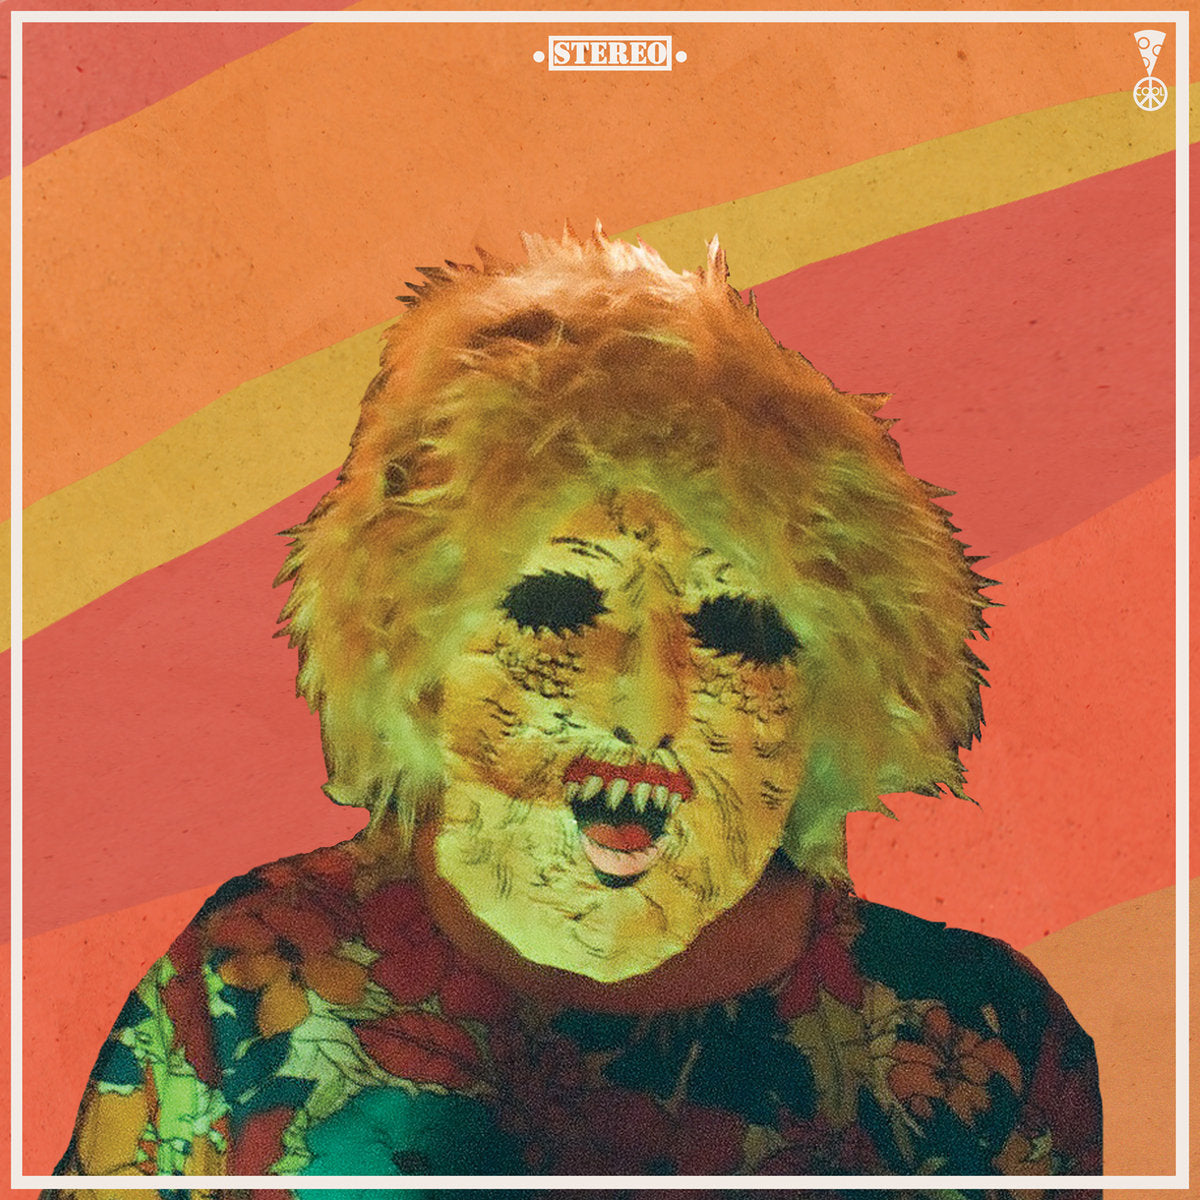 Arcade Sound - Ty Segall - Melted front cover